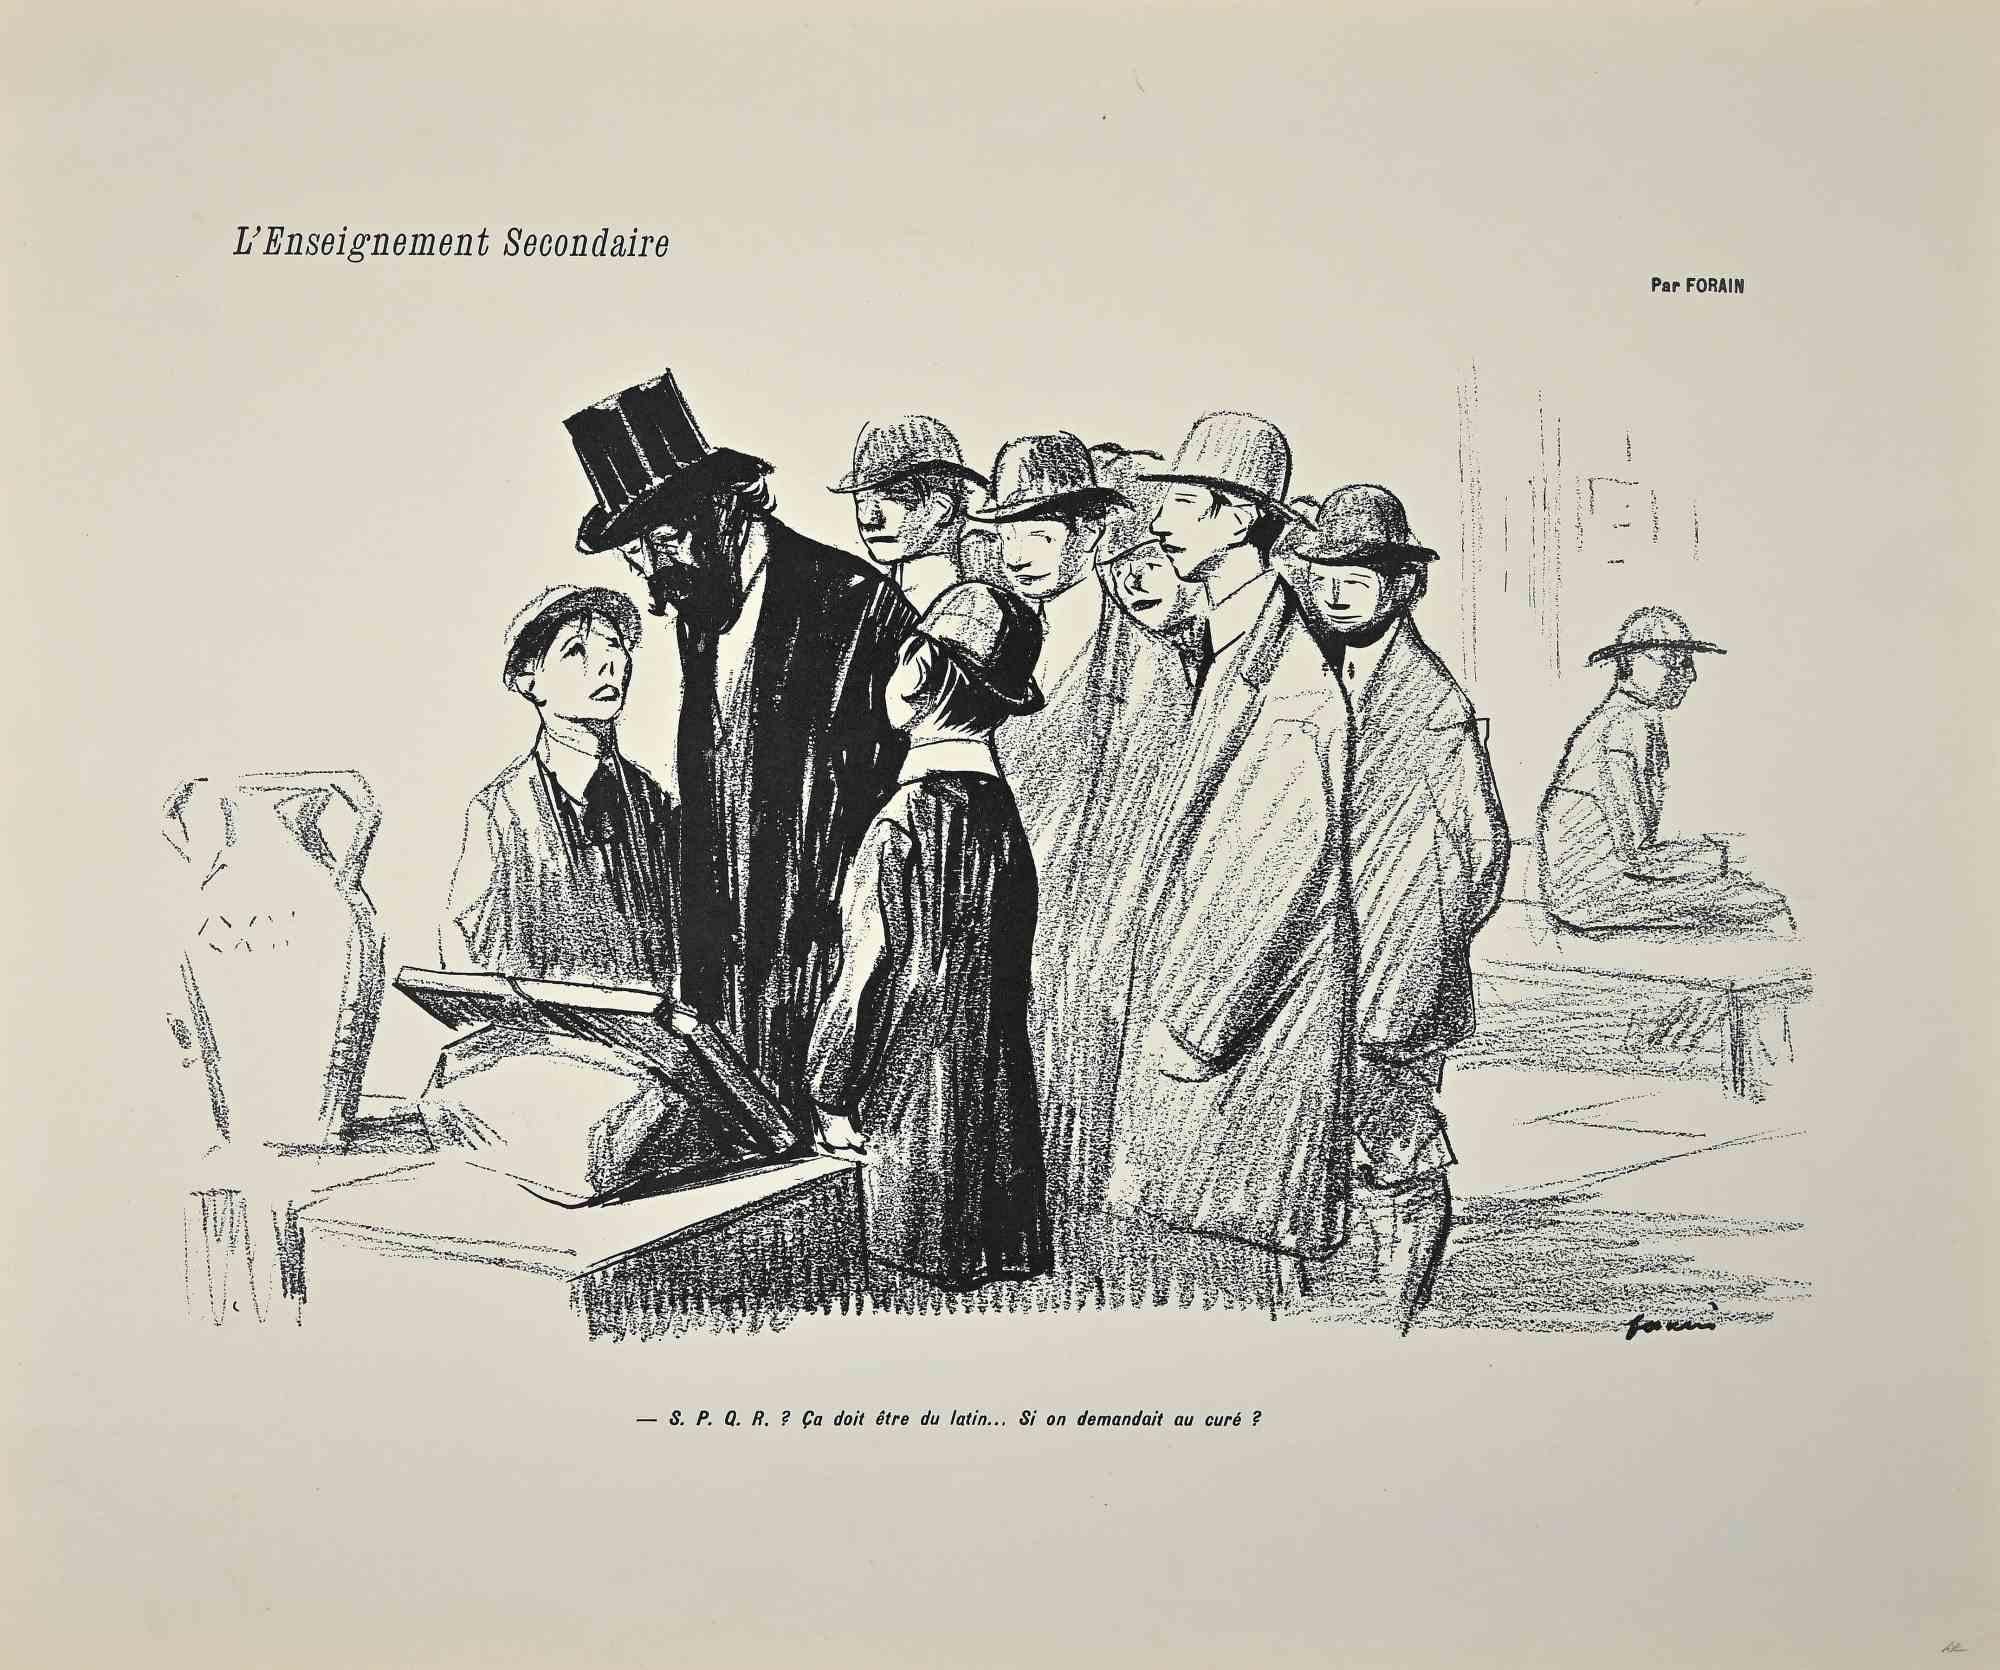 Jean-Luis Forain Figurative Print - Secondary Education - Original Lithograph By J.-L. Forain - Early 20th Century